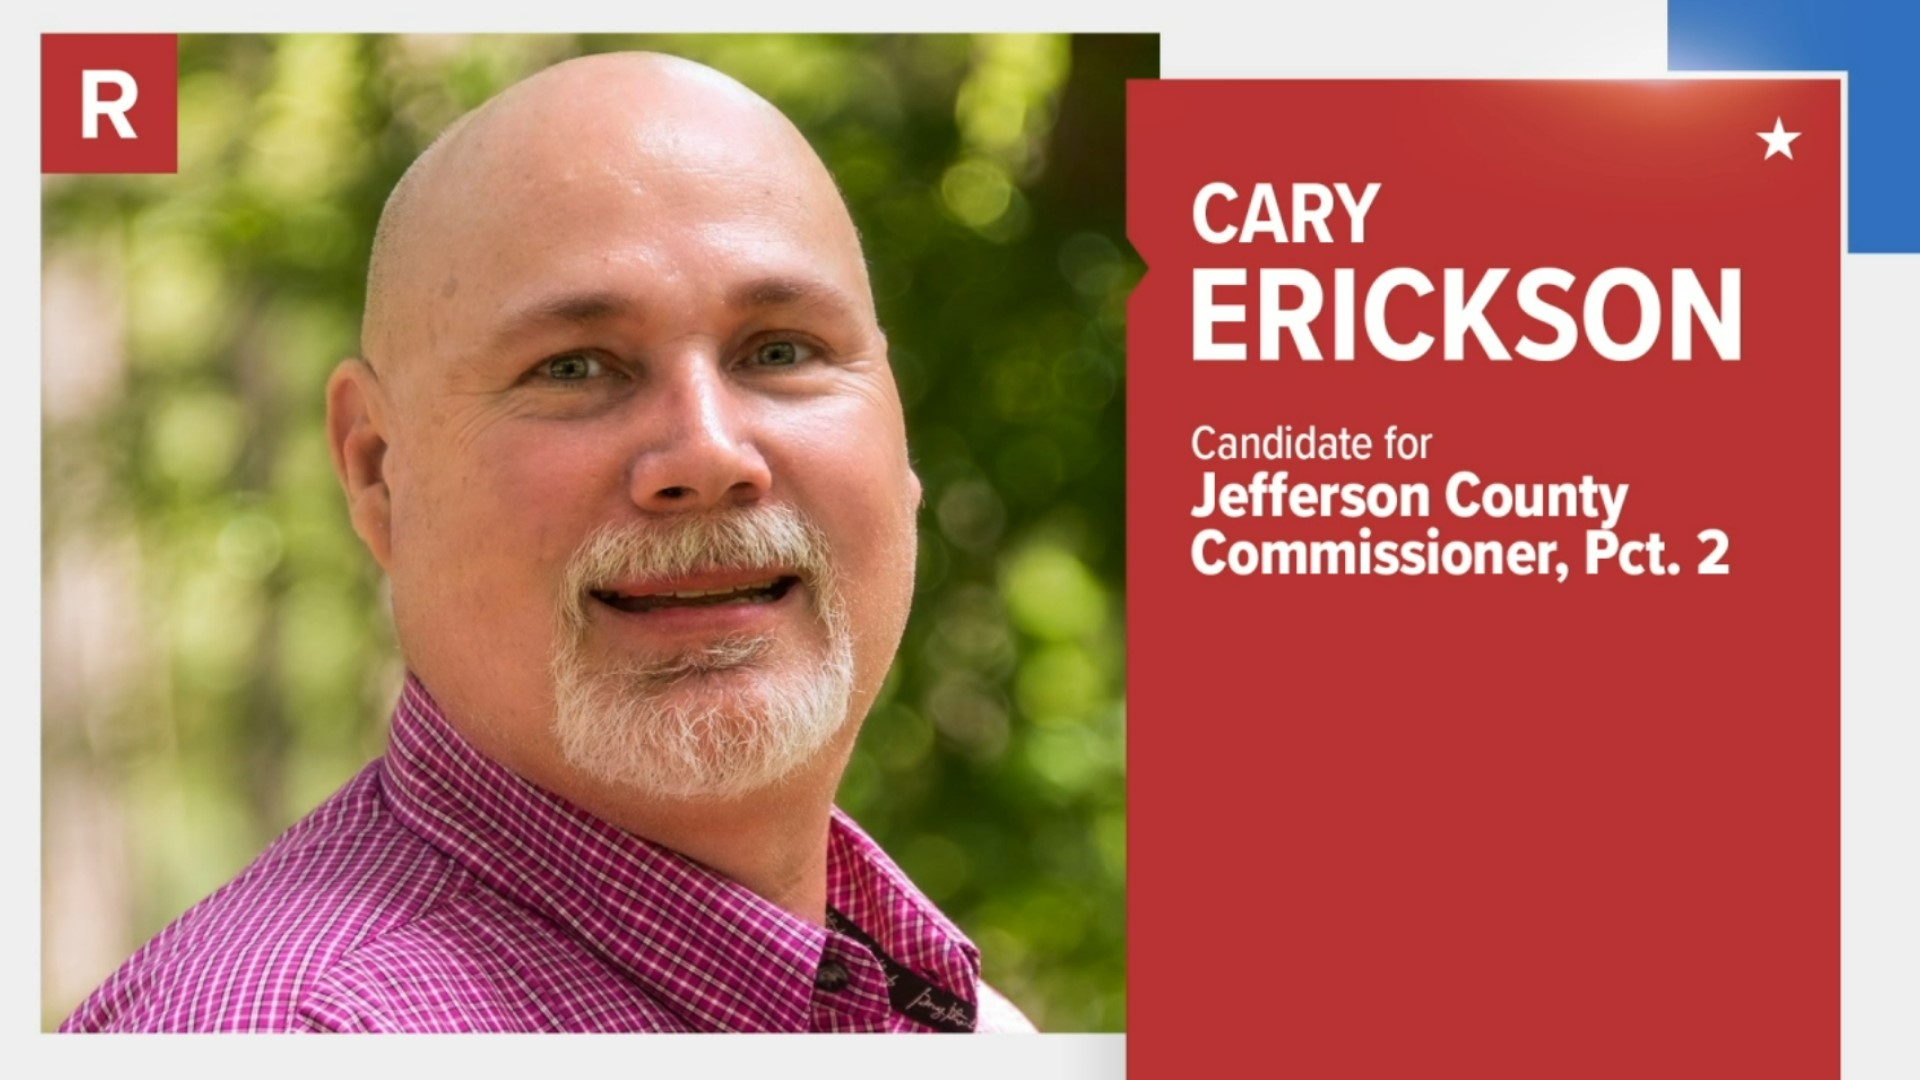 Cary Erickson says some of his main focuses are drainage issues, road issues and maintaining or lowering the tax rate in precinct 2.